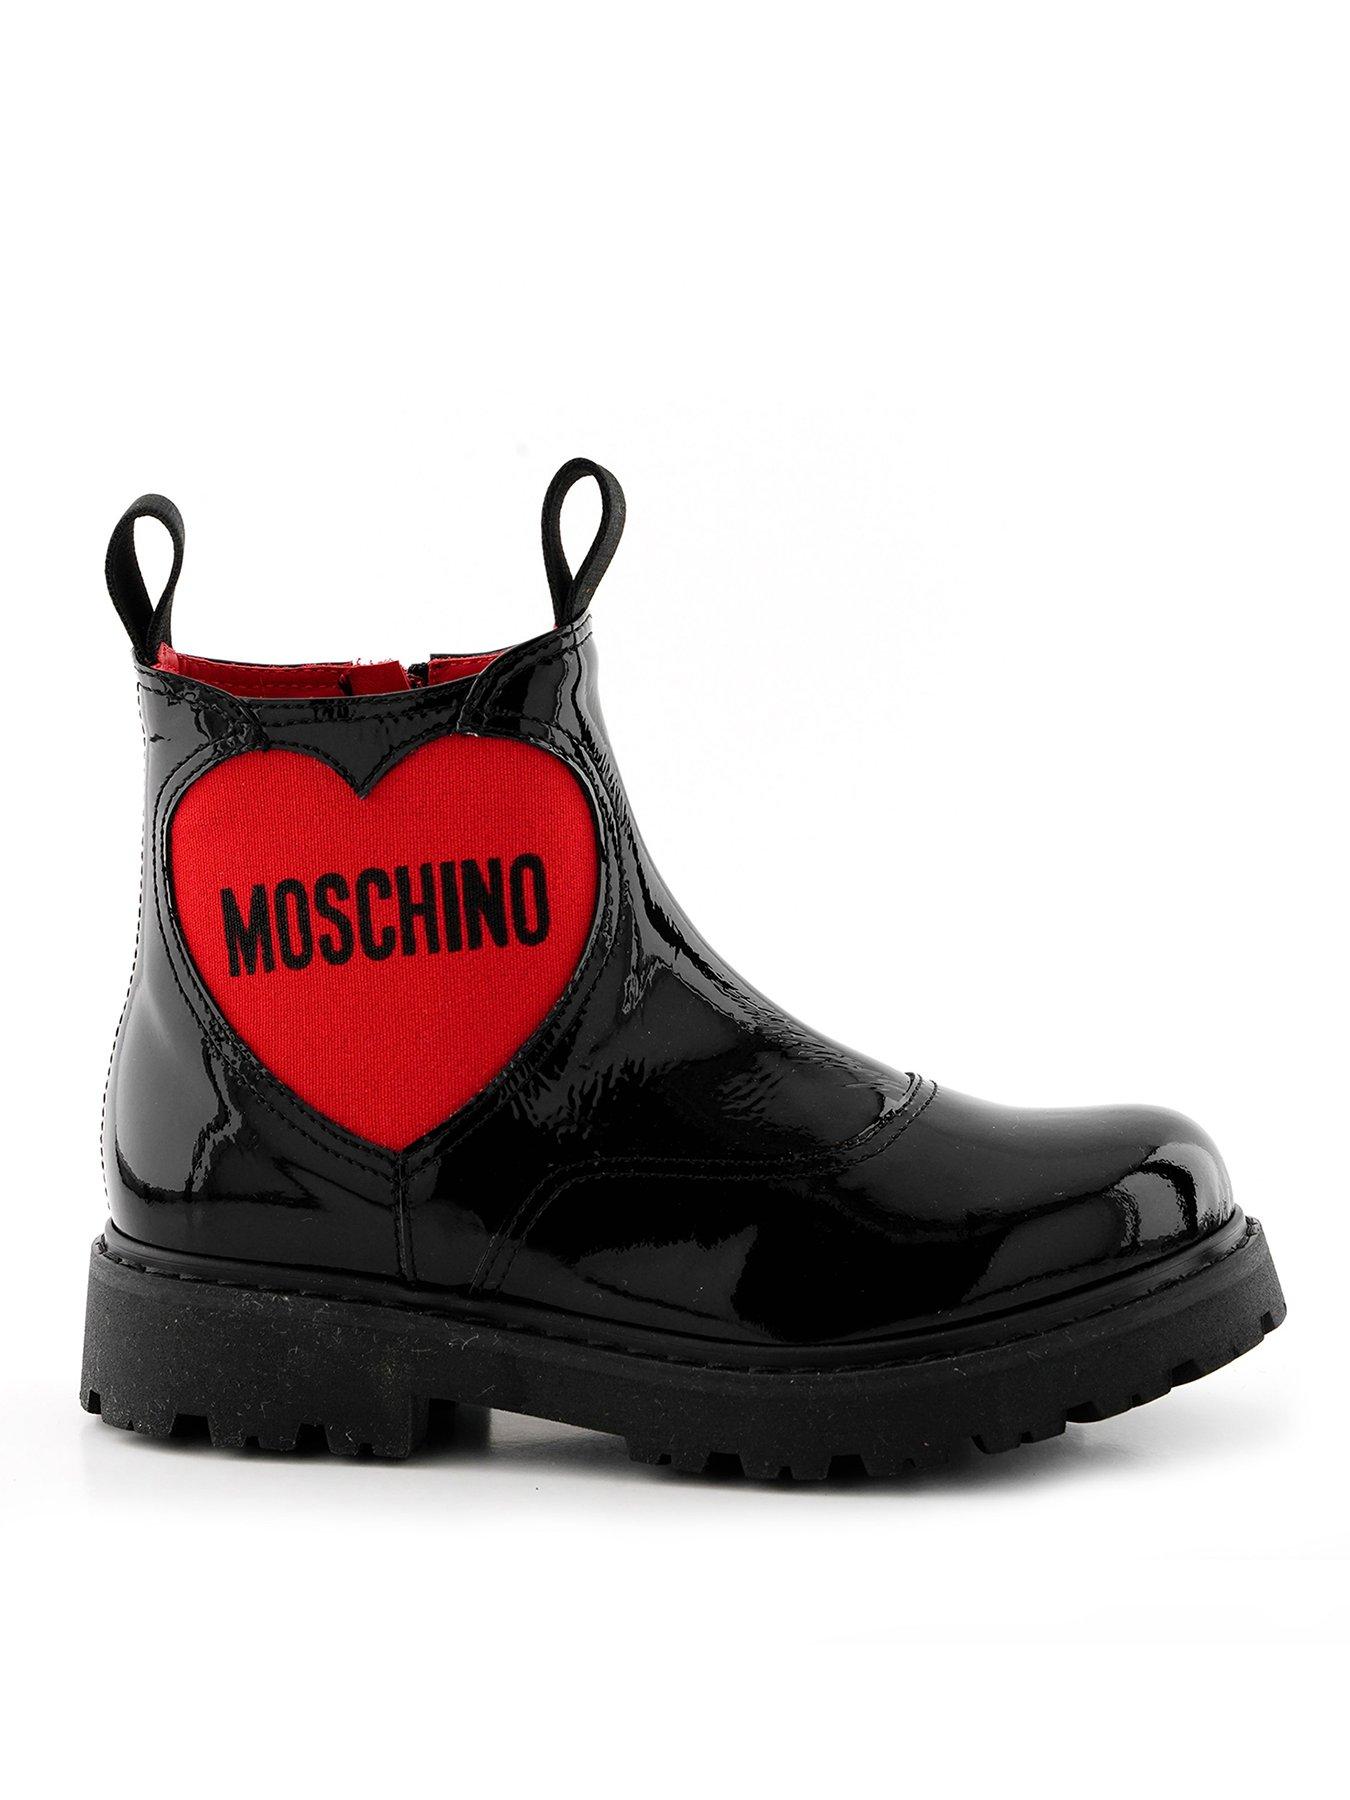 Shoes & boots Girl Moschino Heart Logo Patent Chelsea Boots - Black